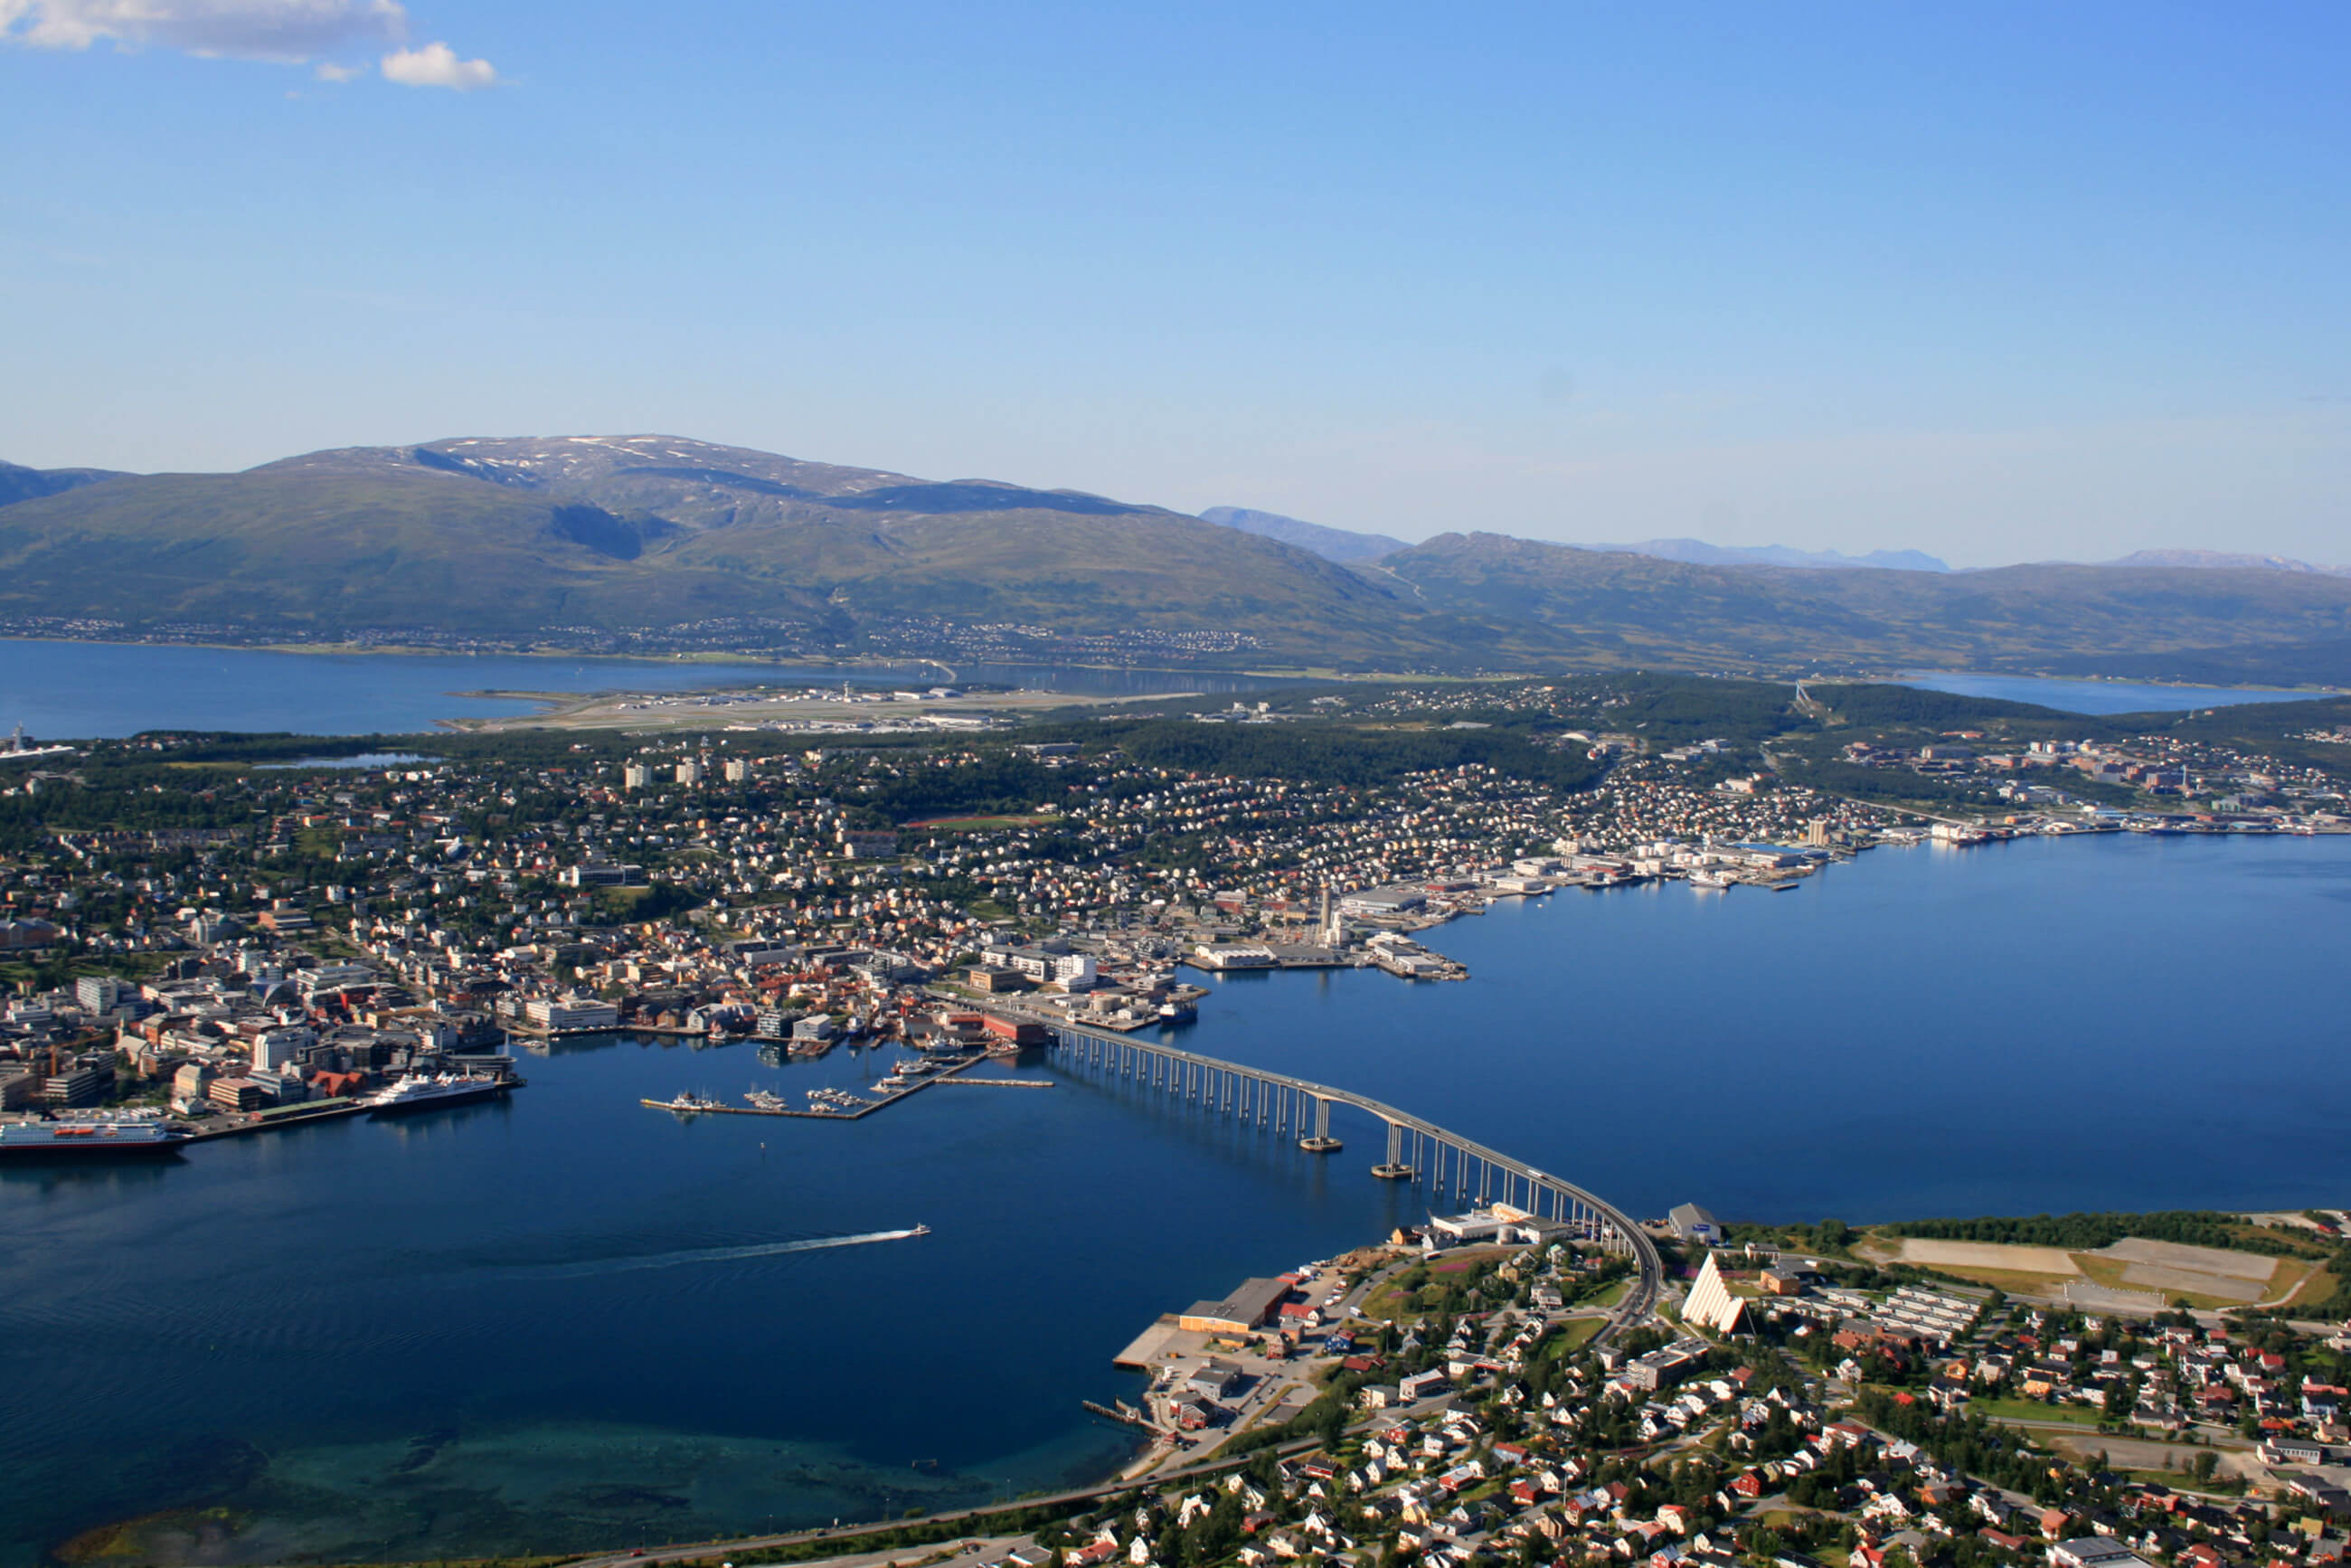 https://bubo.sk/uploads/galleries/19067/tromso-norway-hgr-111948--photo_photo_competition.jpg